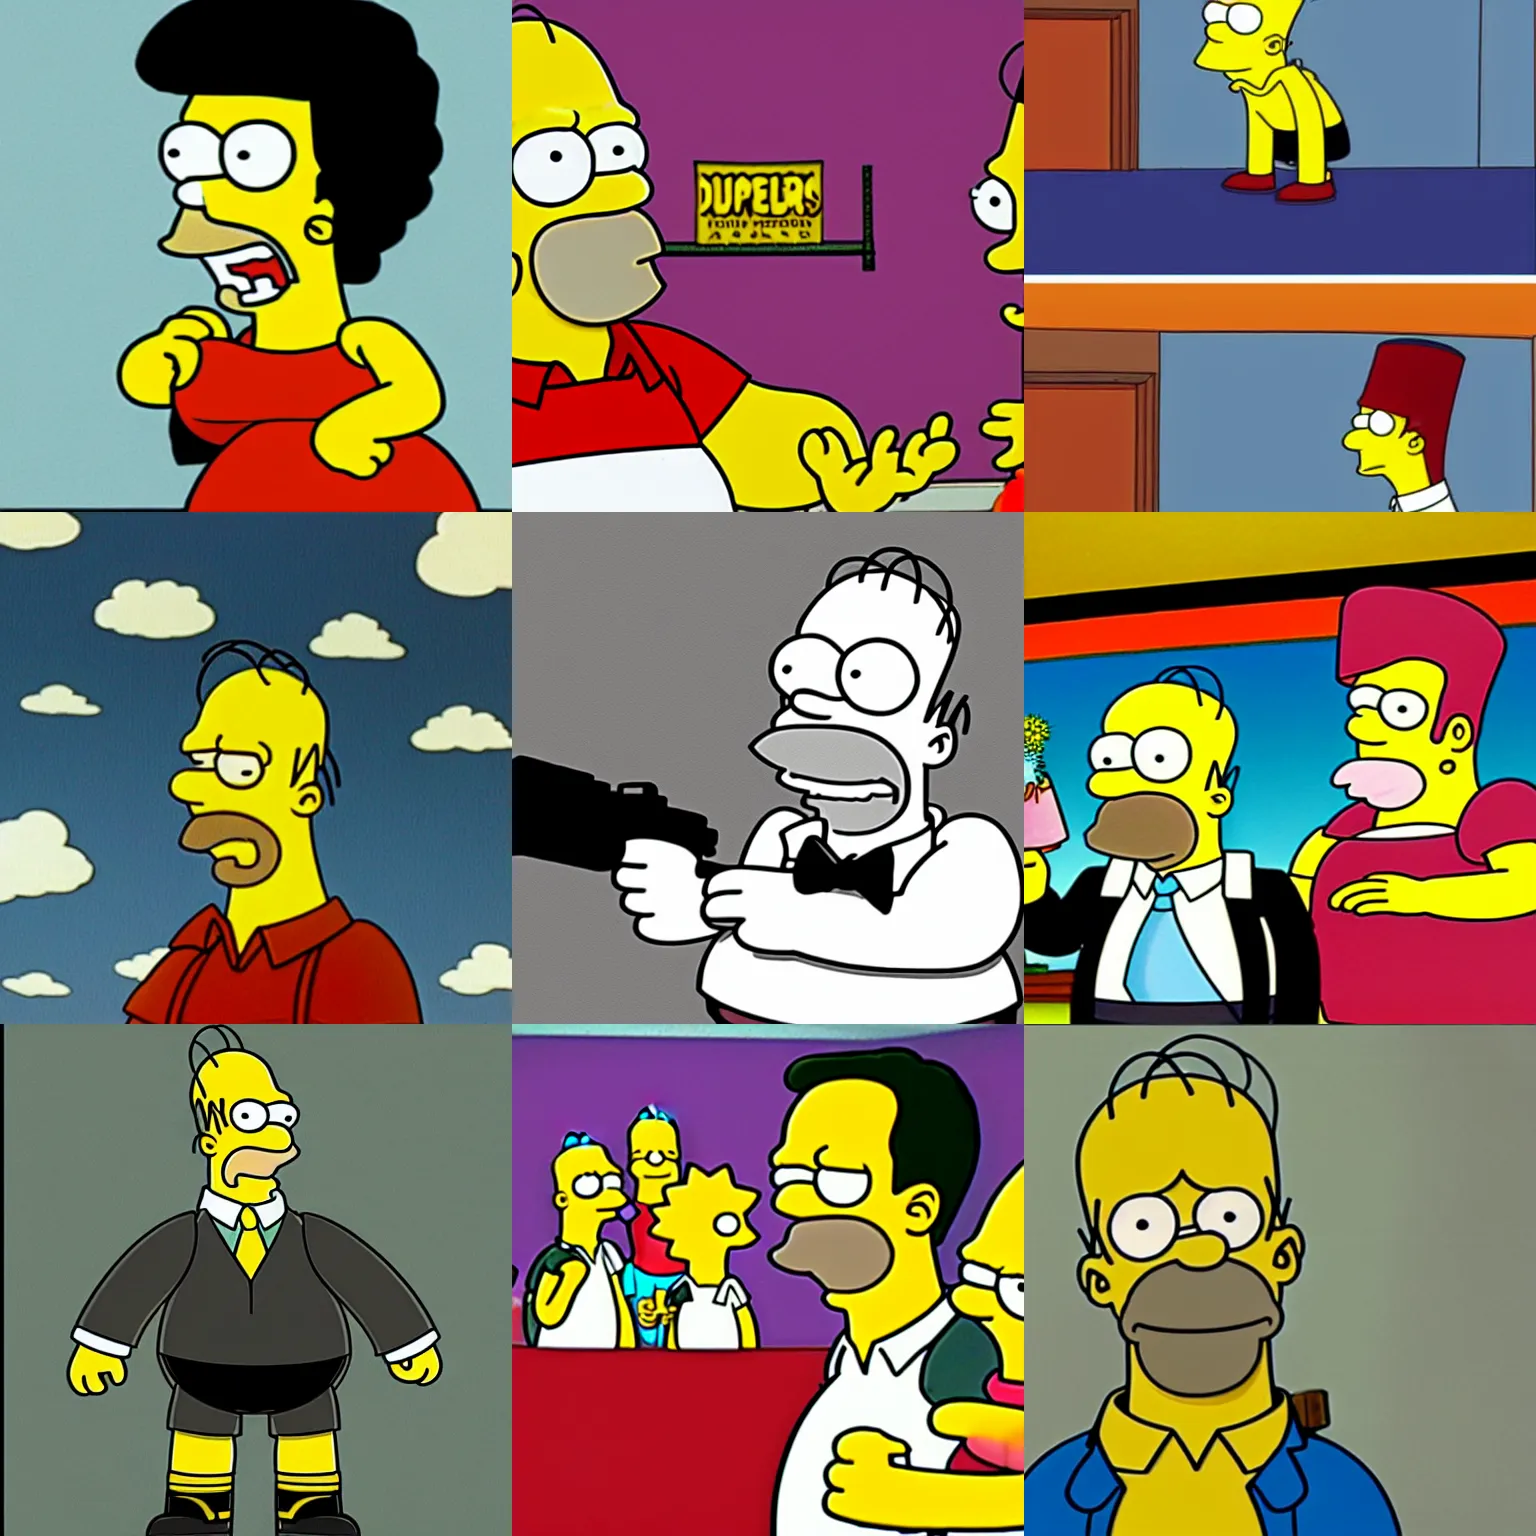 Homer Simpson as a character in the movie Pulp Fiction | Stable ...